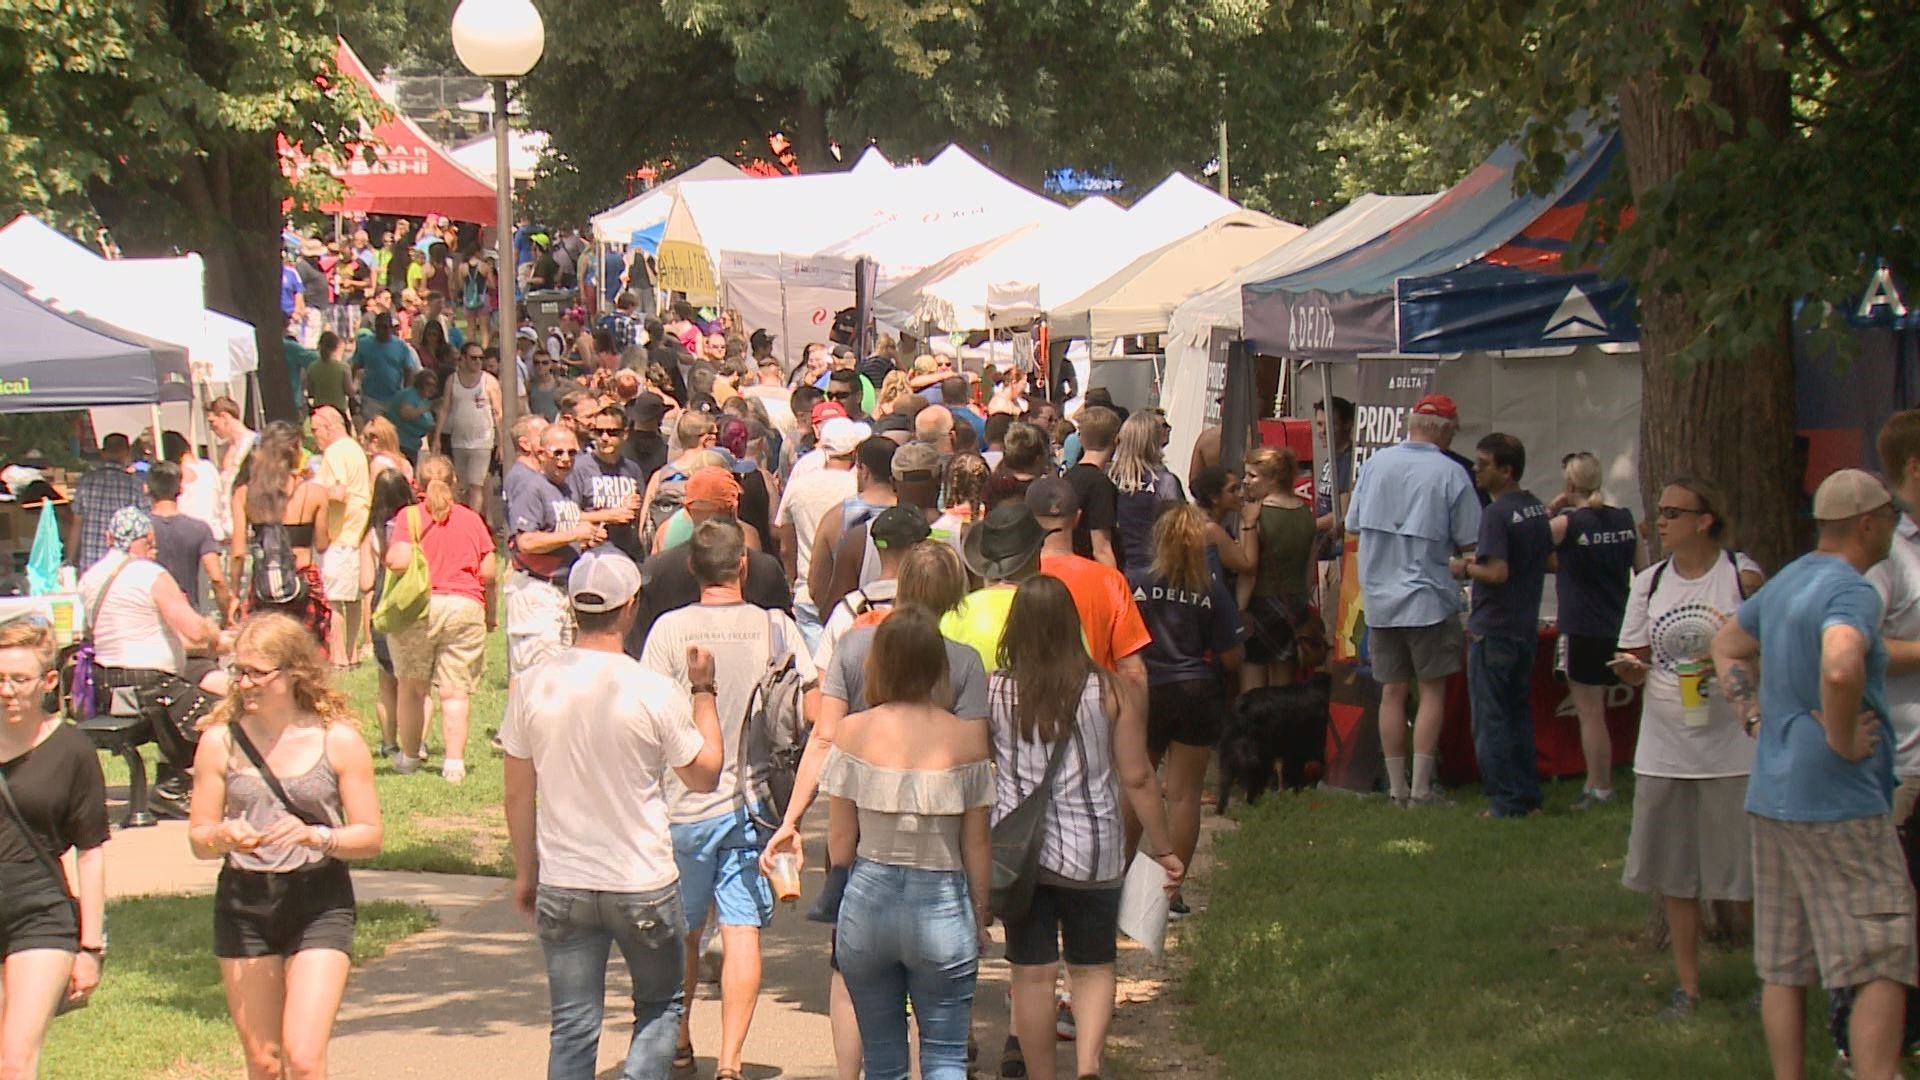 The 50th annual Twin Cities Pride Festival is happening this weekend in Loring Park and vendors are getting ready for a busy two days.